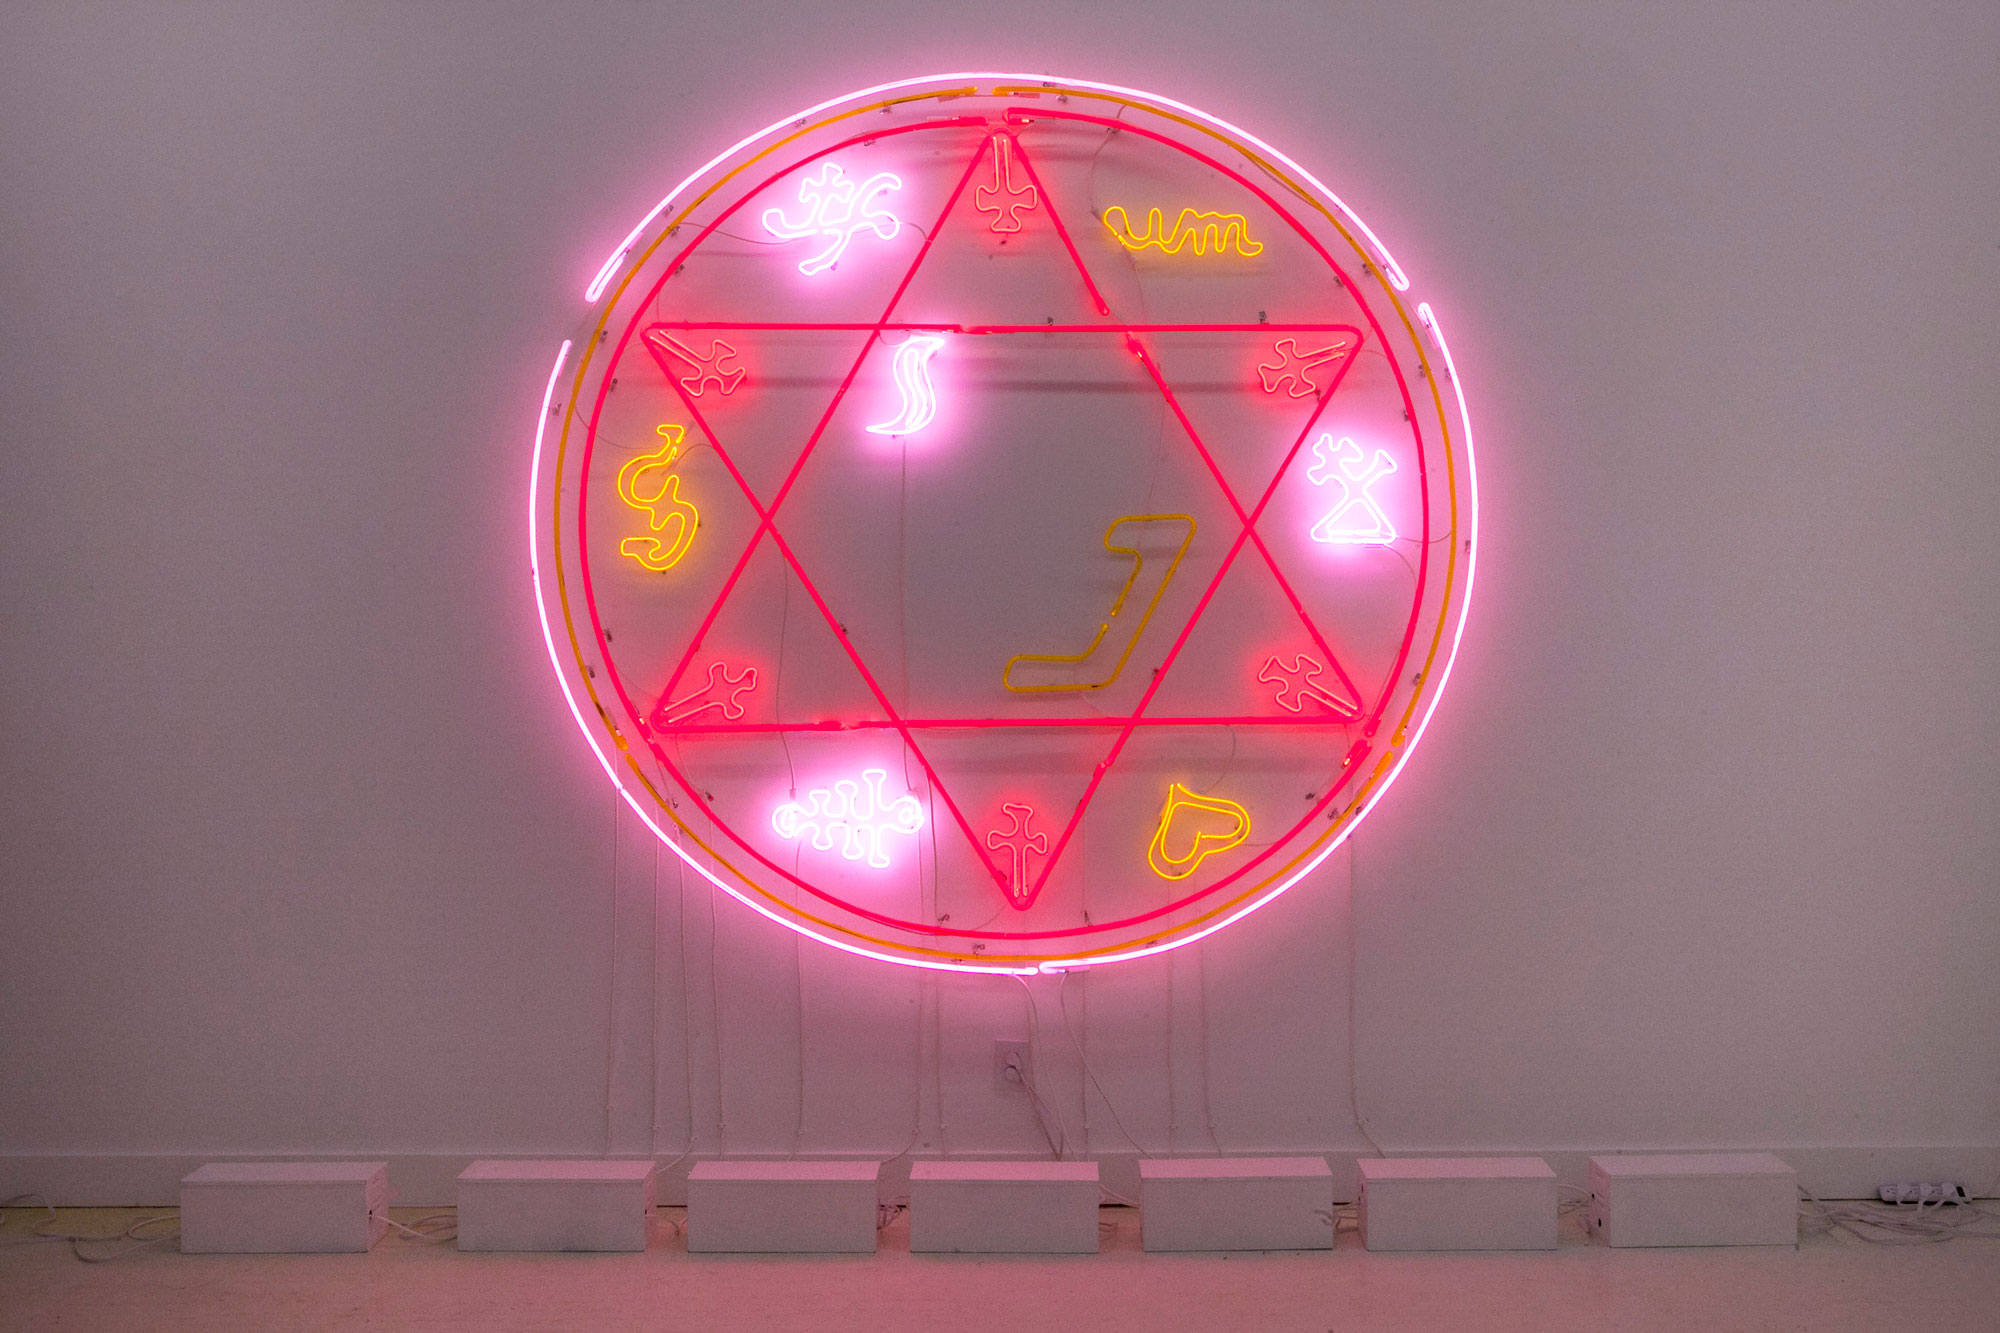 Circular neon wall piece with six-pointed star pattern, yellow, pink and red symbols